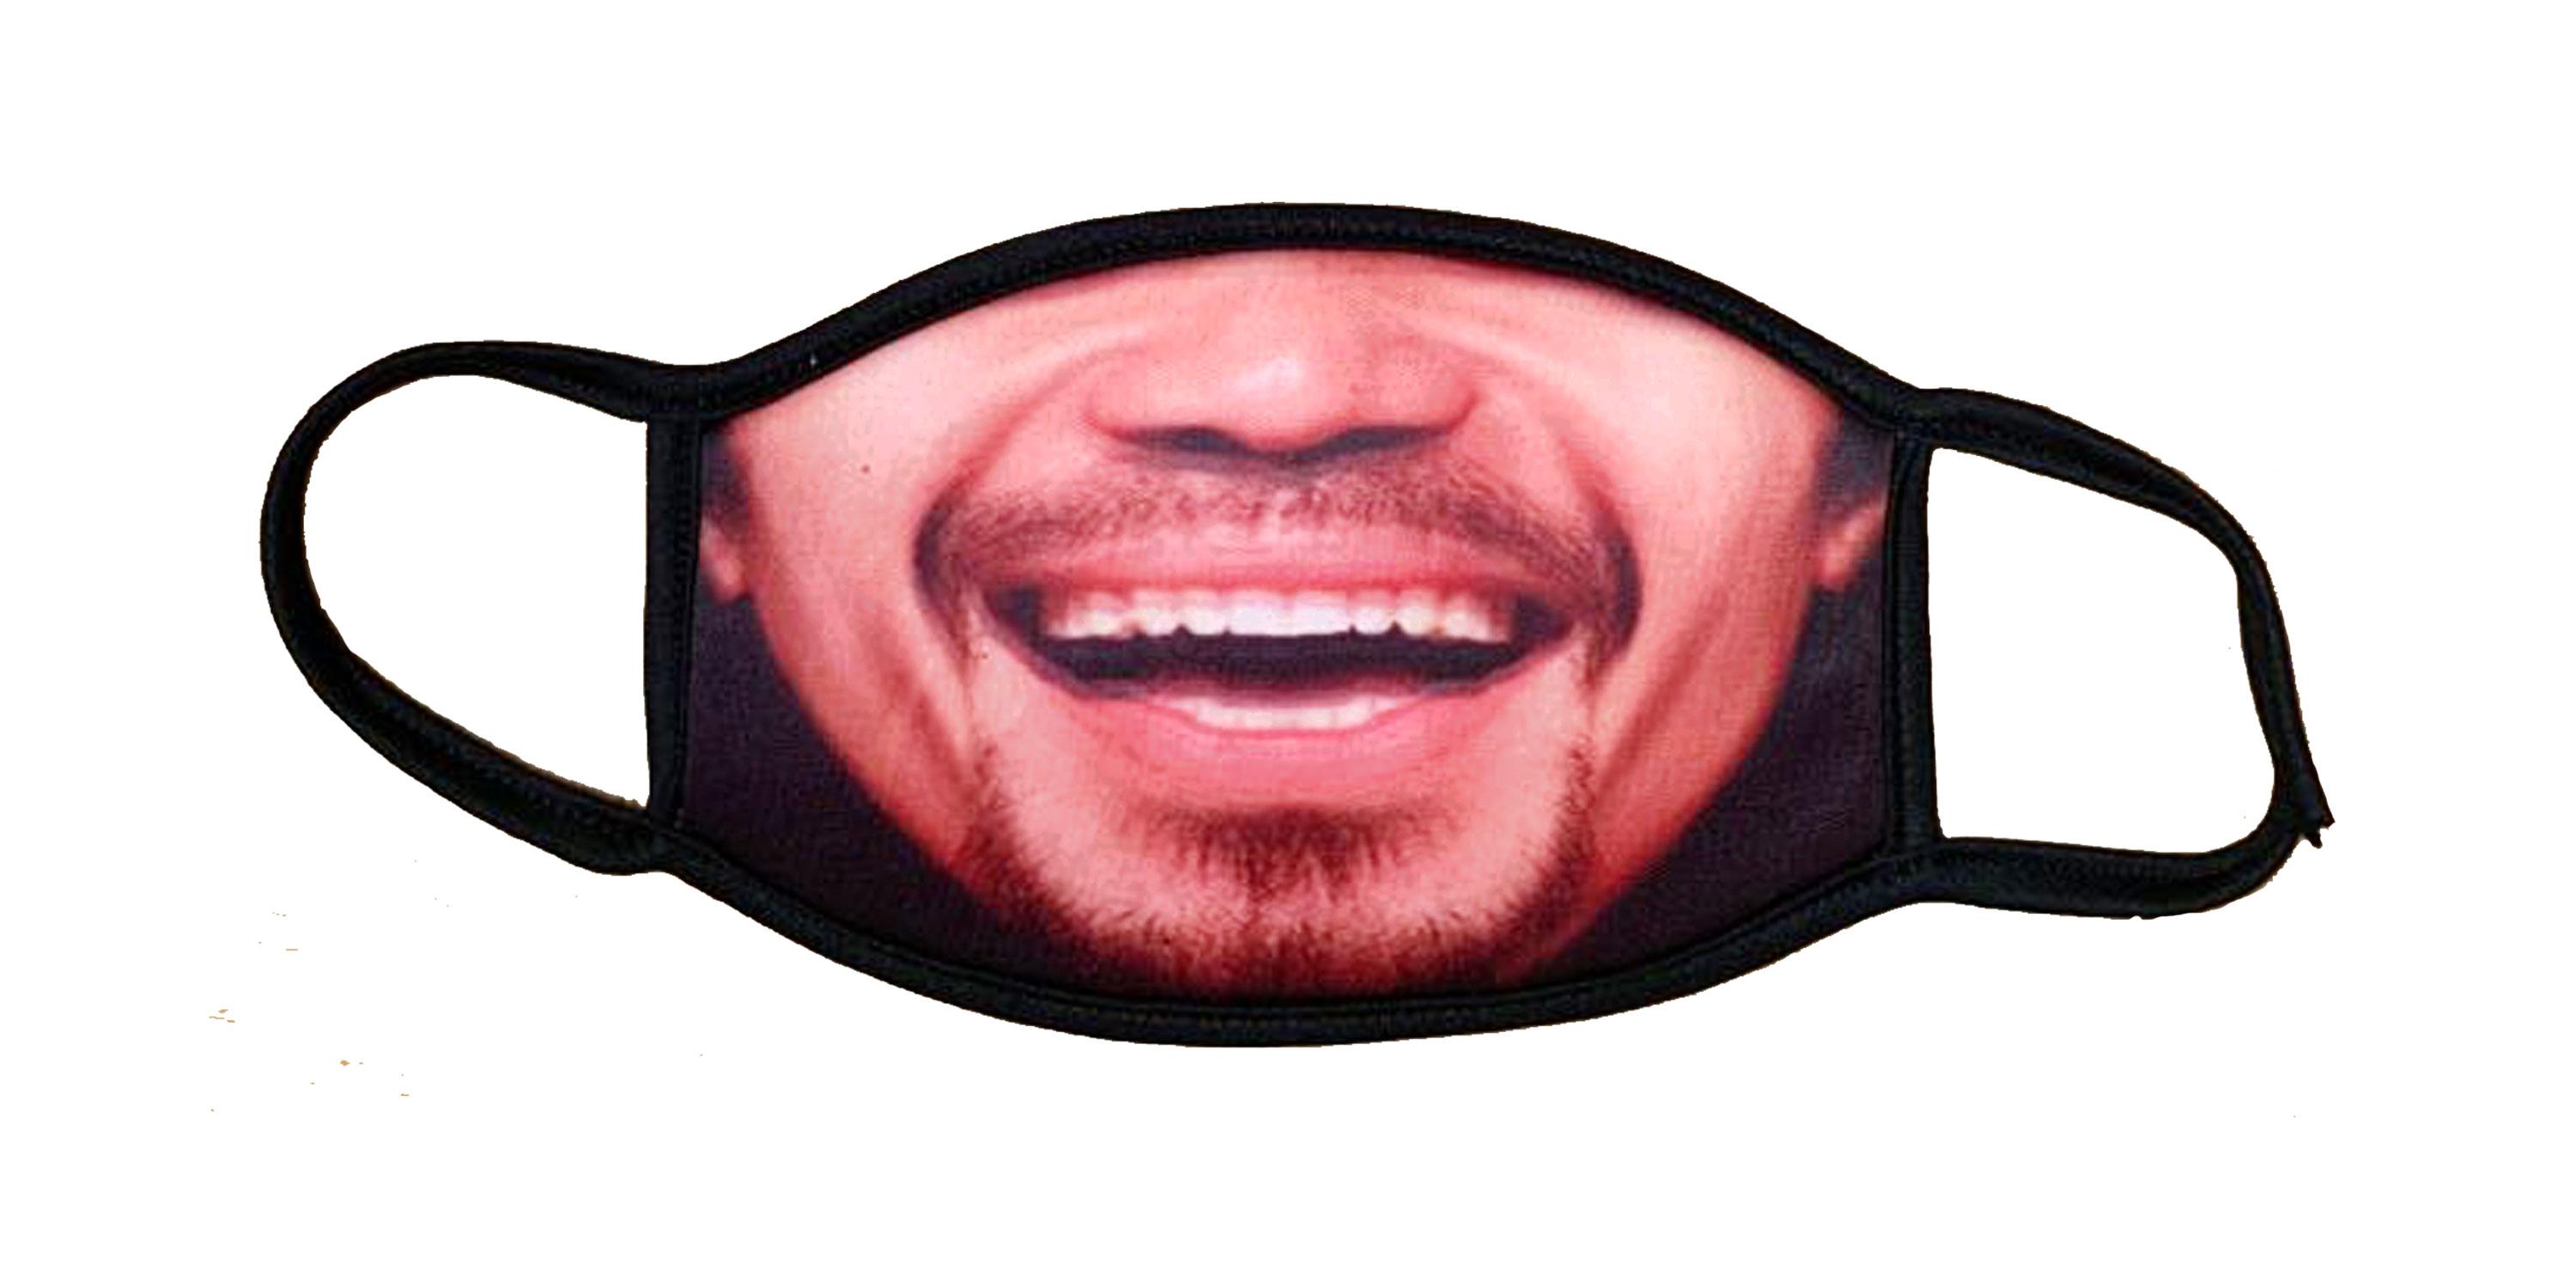 Card Face and Fancy Dress Mask Manny Pacquiao Celebrity Mask 